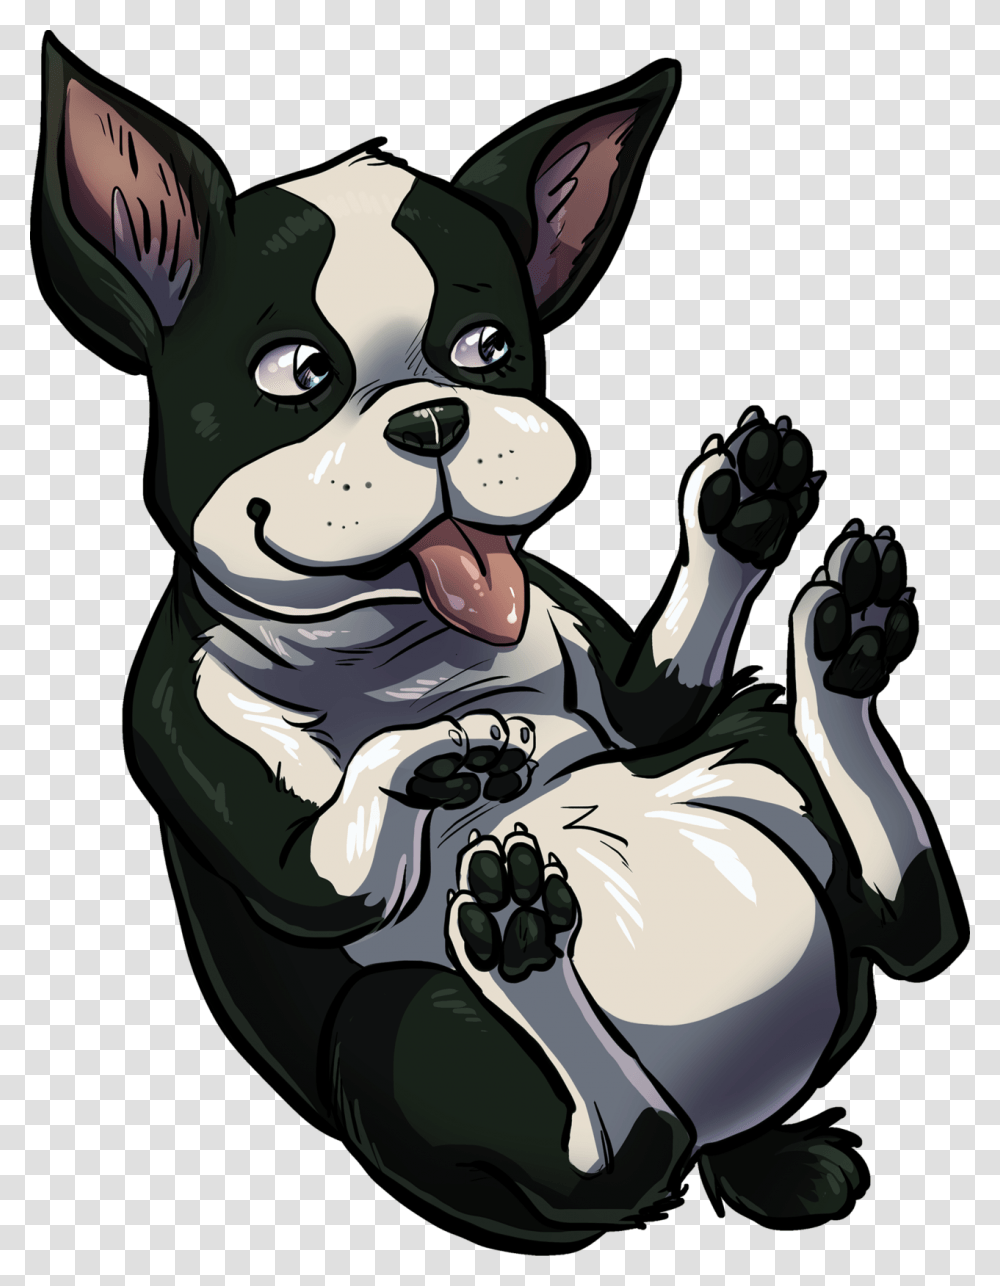 Iggy For The Jjba Art Discord Even Though He Was A Boston Terrier, Mammal, Animal, Wildlife, Pet Transparent Png